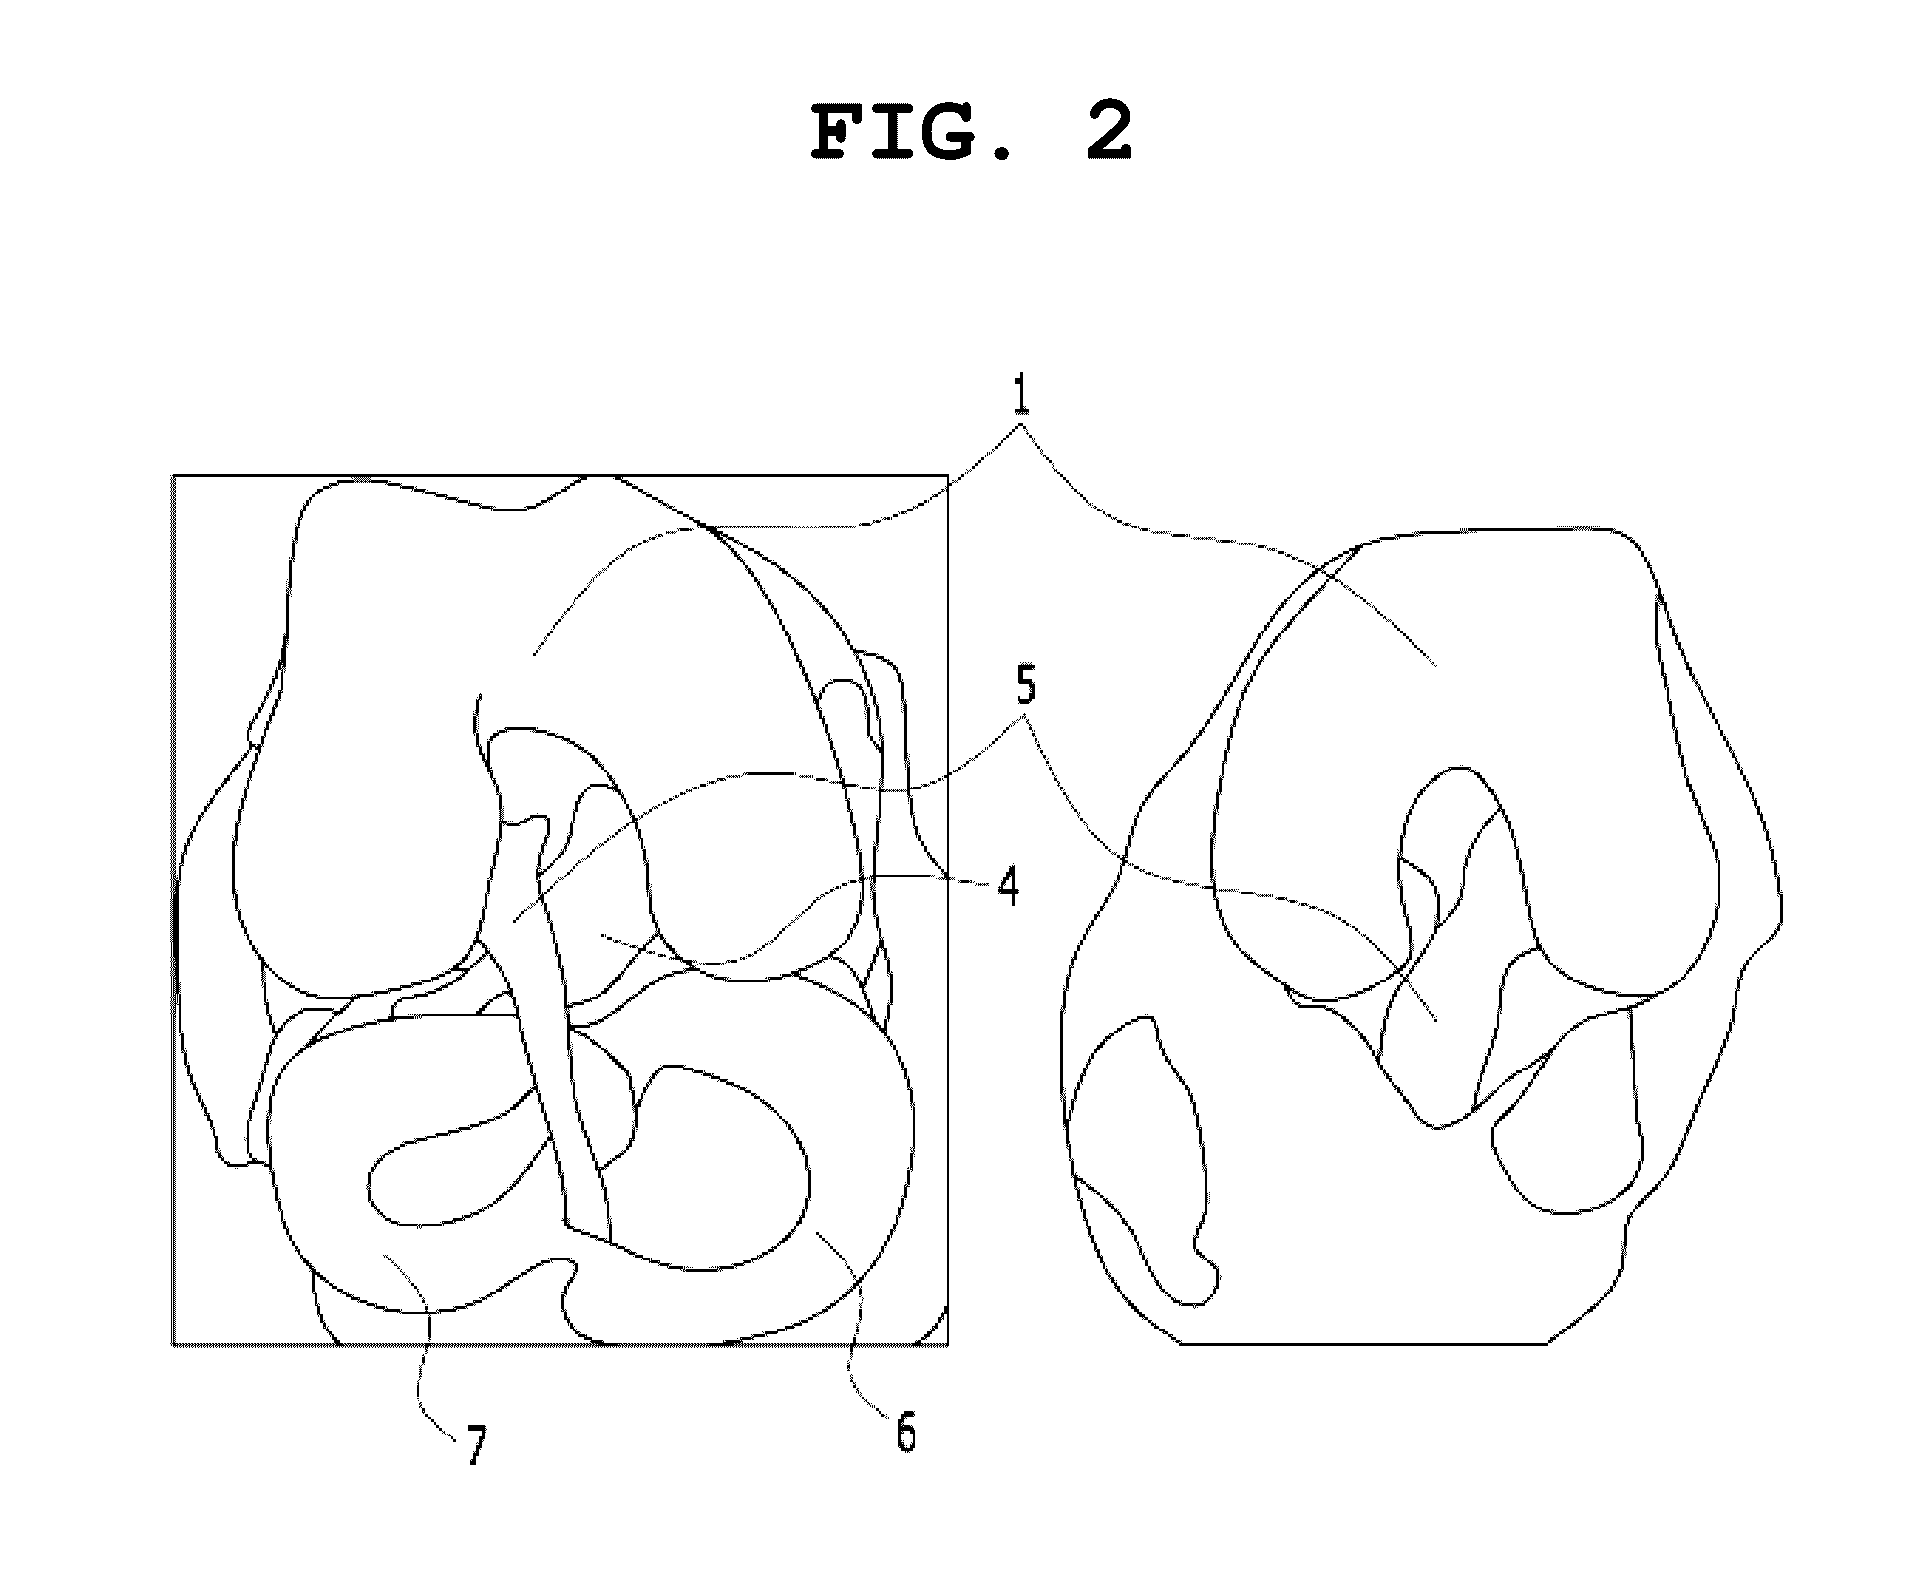 System and method for simulating reconstructive surgery of anterior cruciate ligament using medical images